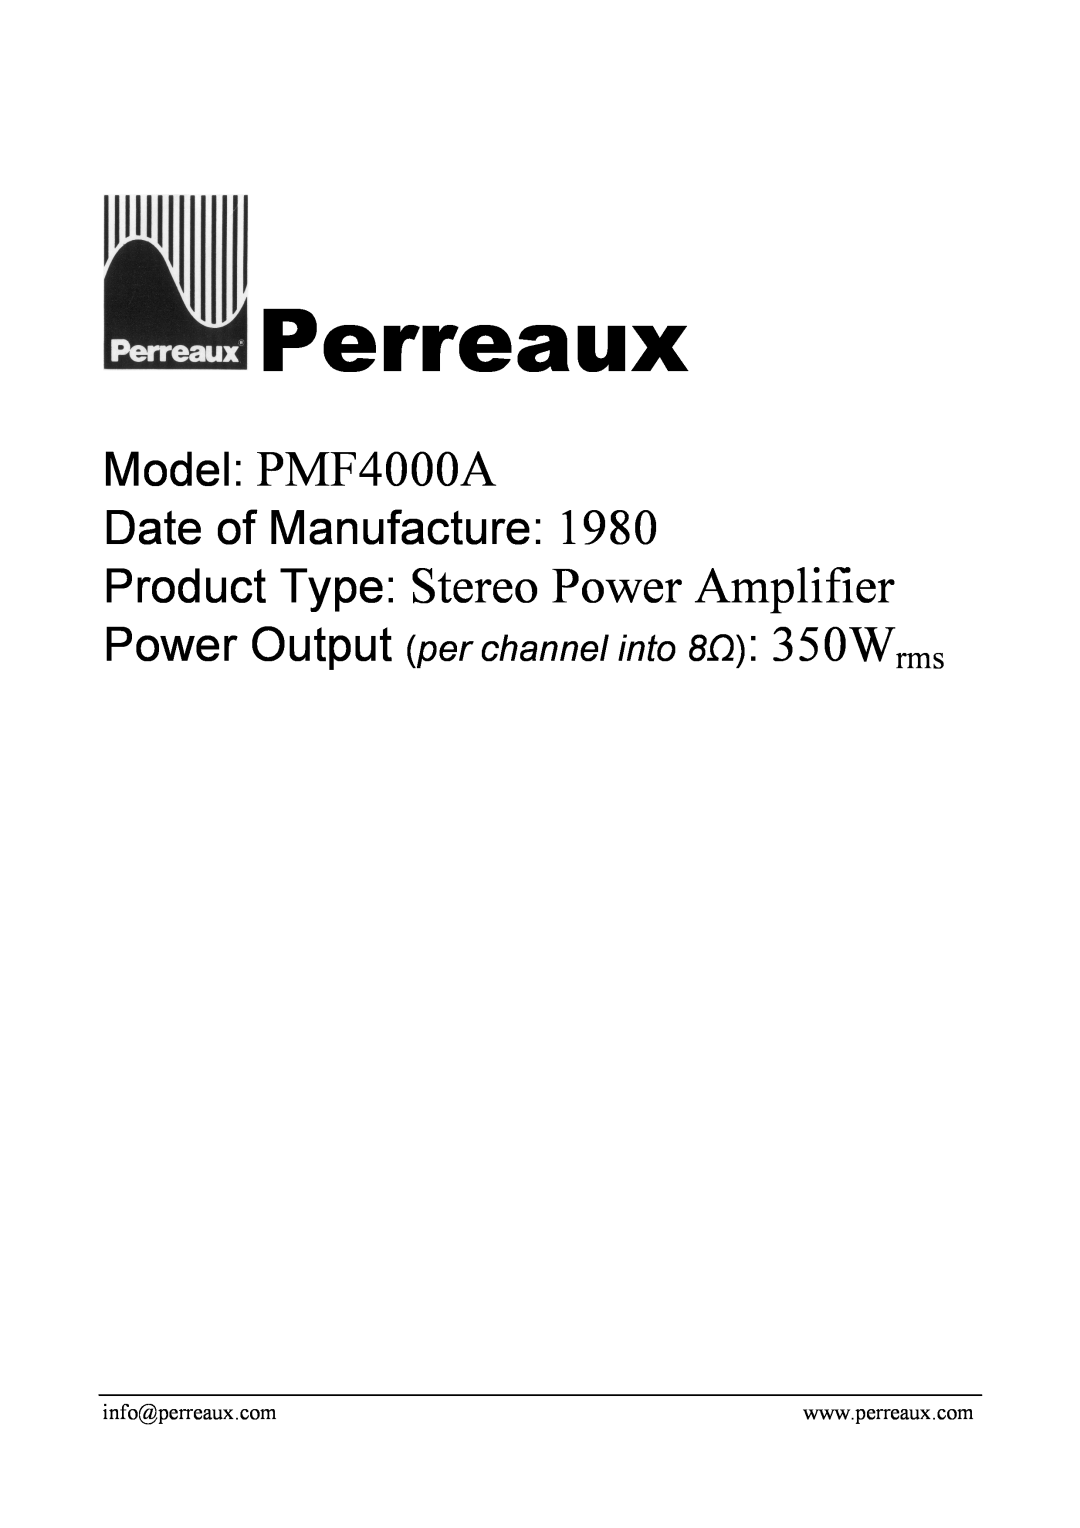 Perreaux manual Perreaux, Model PMF4000A, Product Type Stereo Power Amplifier, Date of Manufacture 